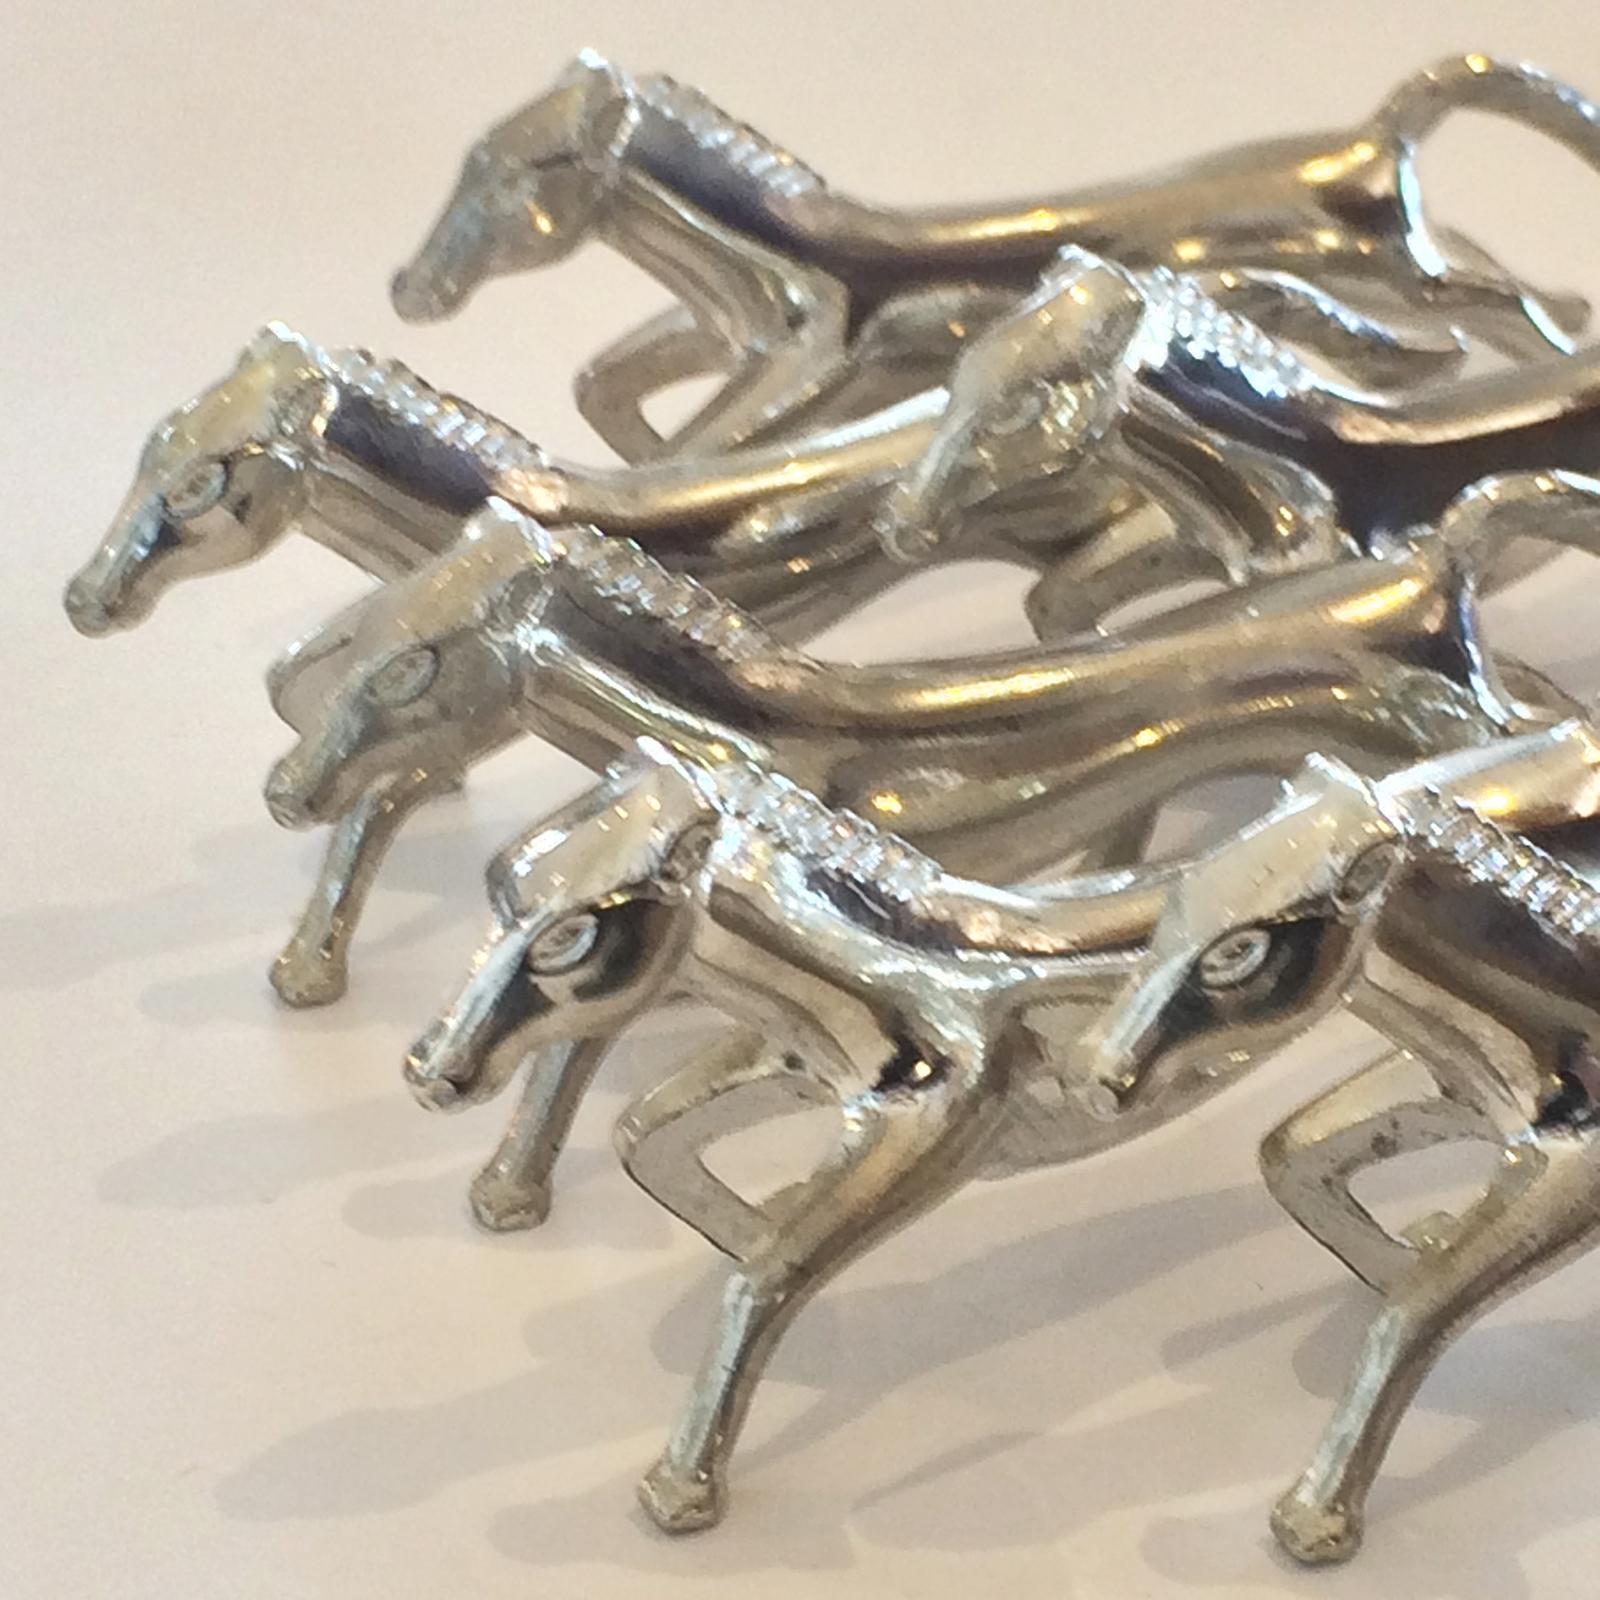 Art Deco French knife rests, 6 galloping horses in quality silver plate. All in “as new” condition, no damage, original silver finish. These are as good as you will get, lovely set. Dimensions are approximate: 8.5cm long x 3.5cm high x 1.5cm wide.